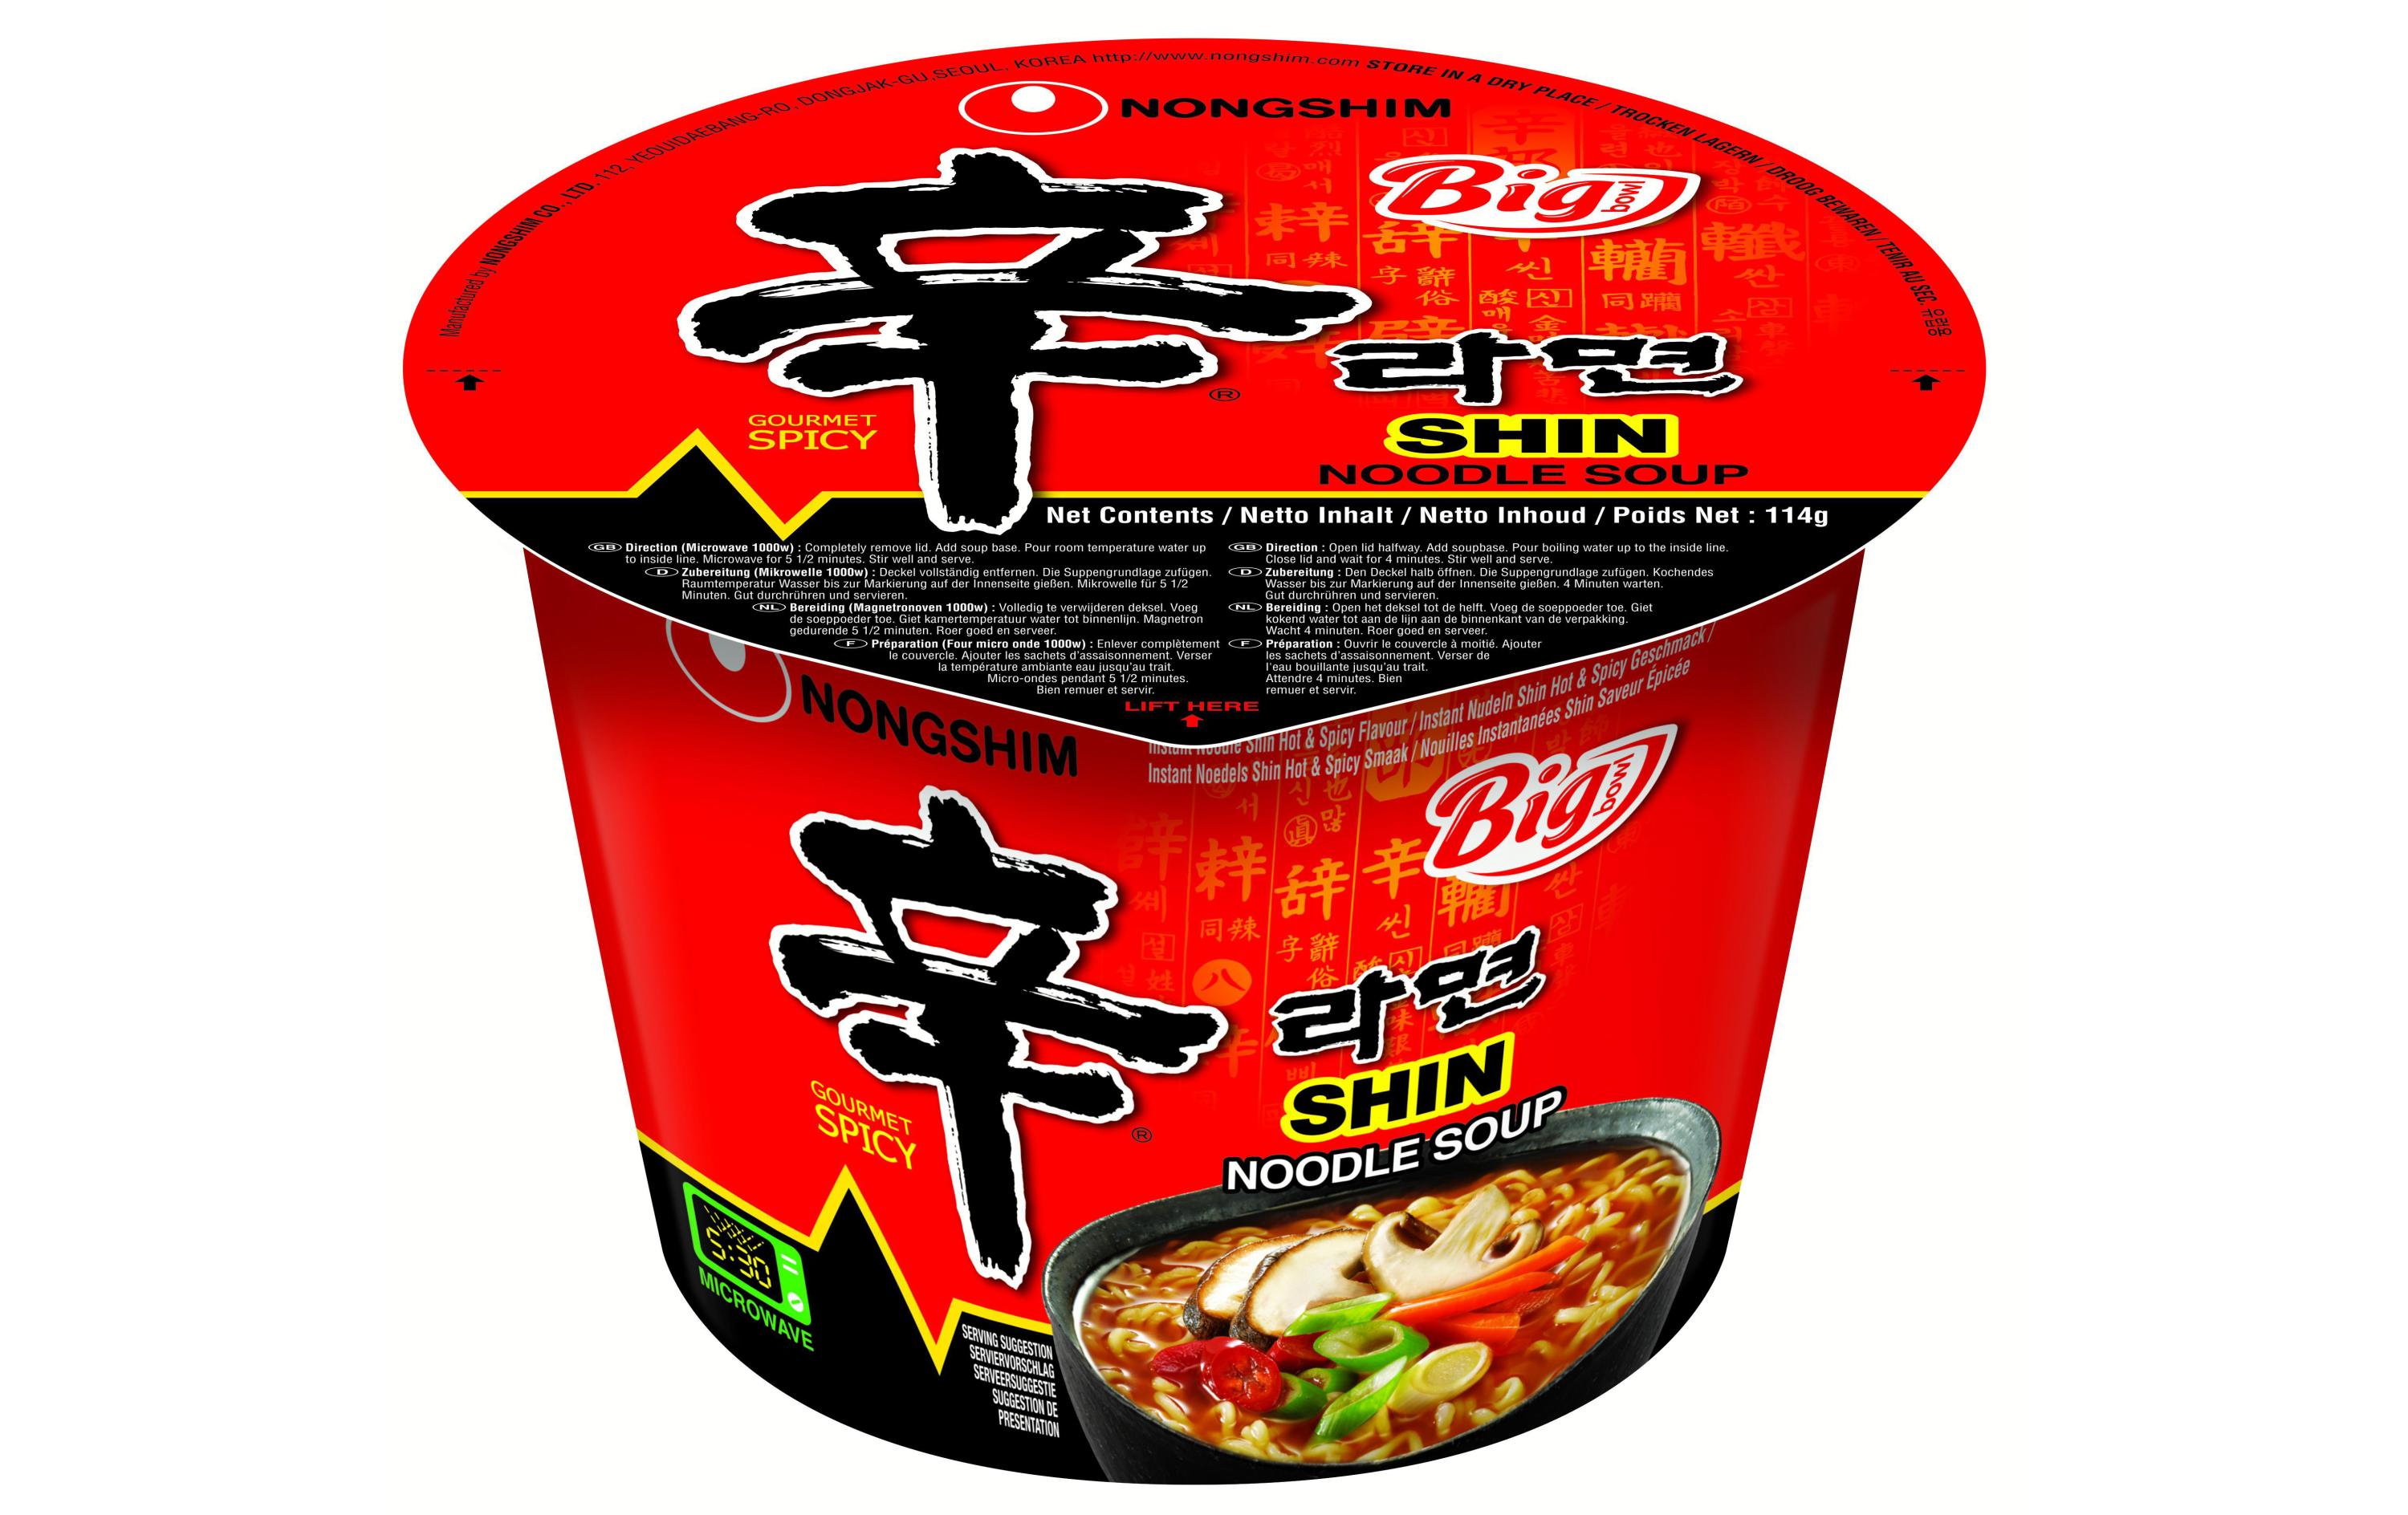 Nongshim Nudelsuppe Shin's Big Cup 114 g